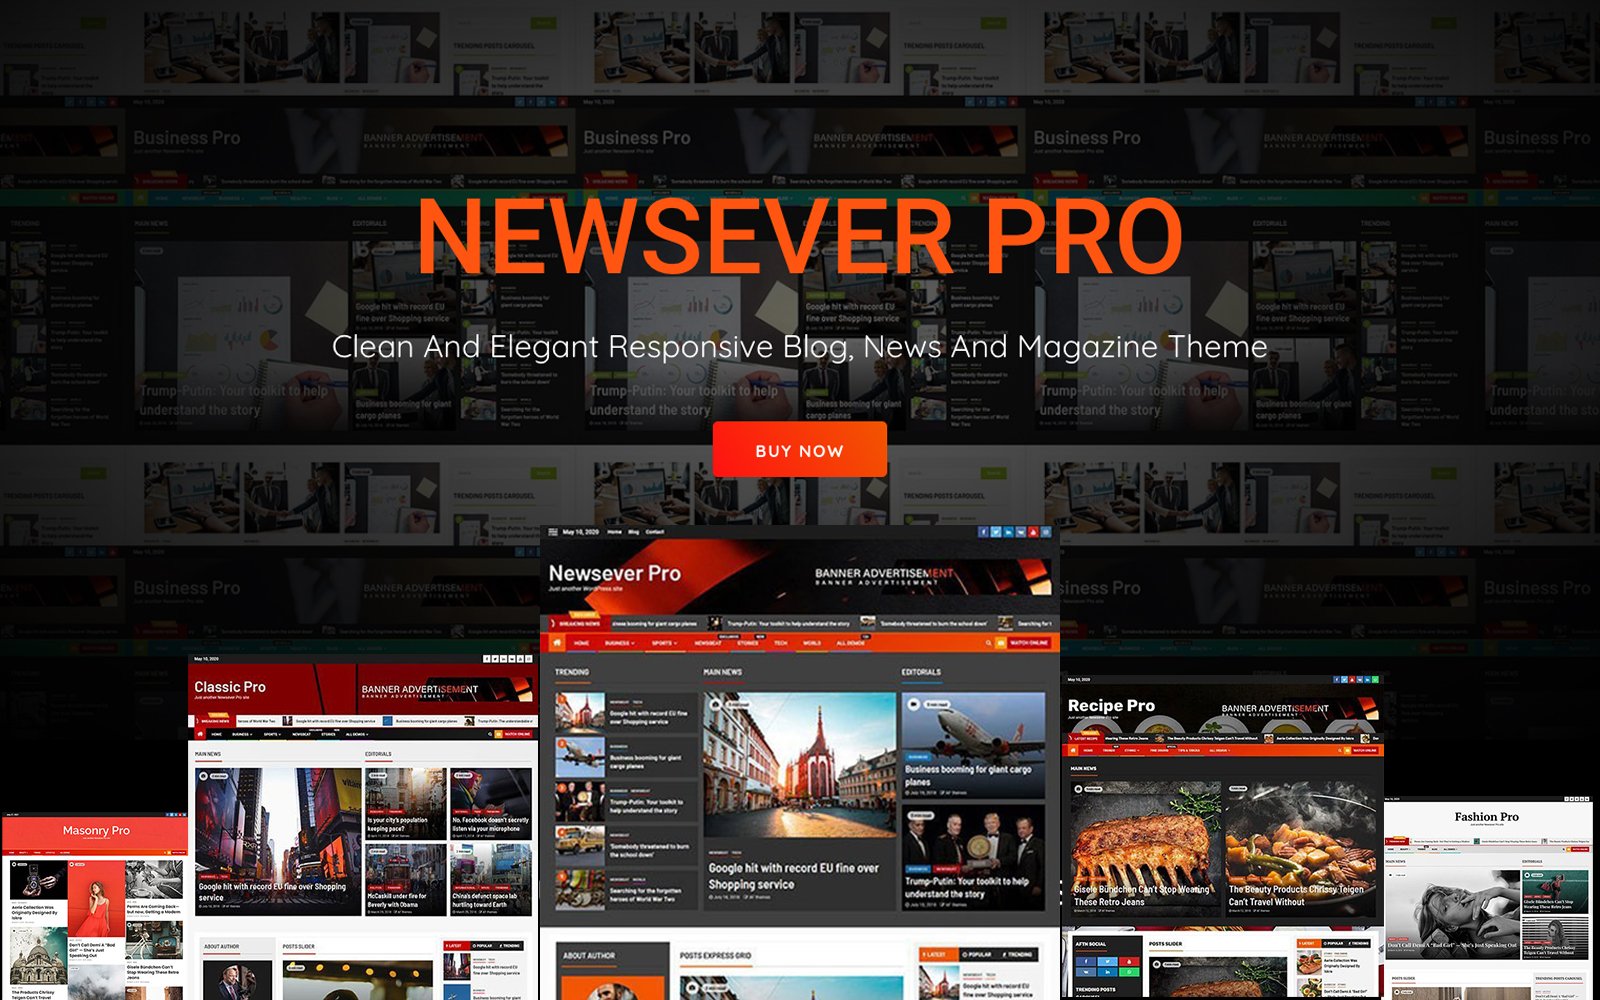 Newsever Pro – An ideal WordPress Theme for Best Responsive News and Magazine Sites